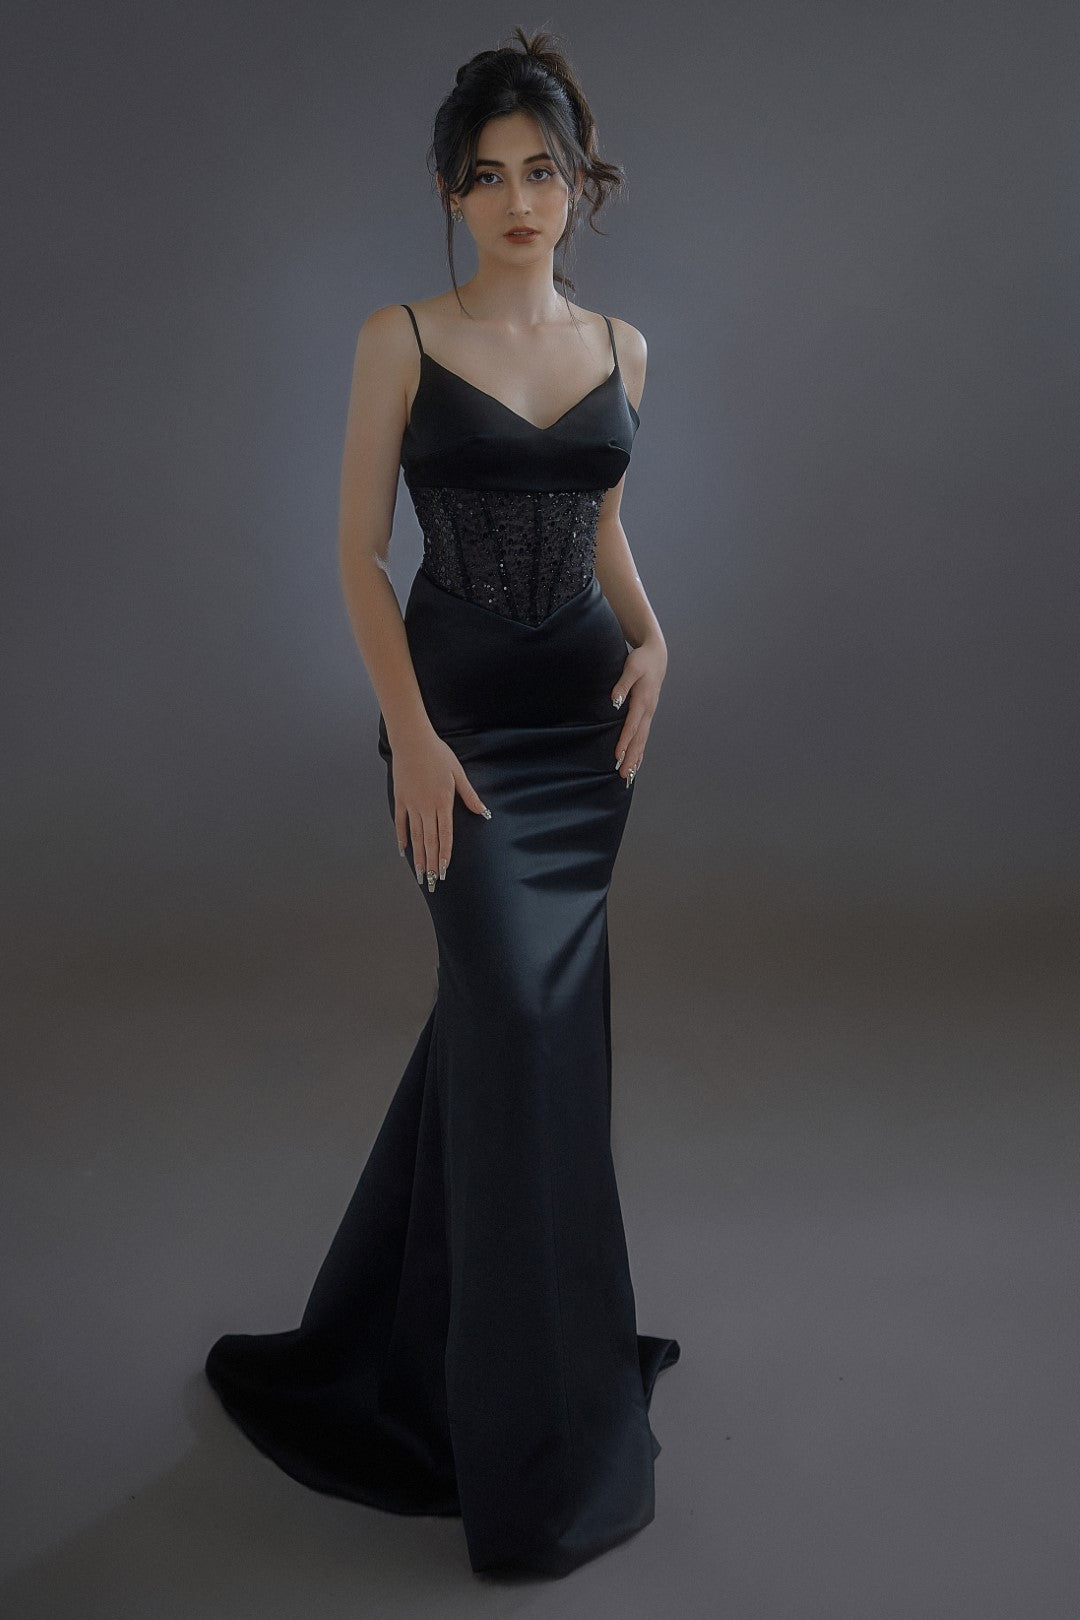 Jocasta - Black and Sexy Mermaid Dress for Unforgettable Evenings